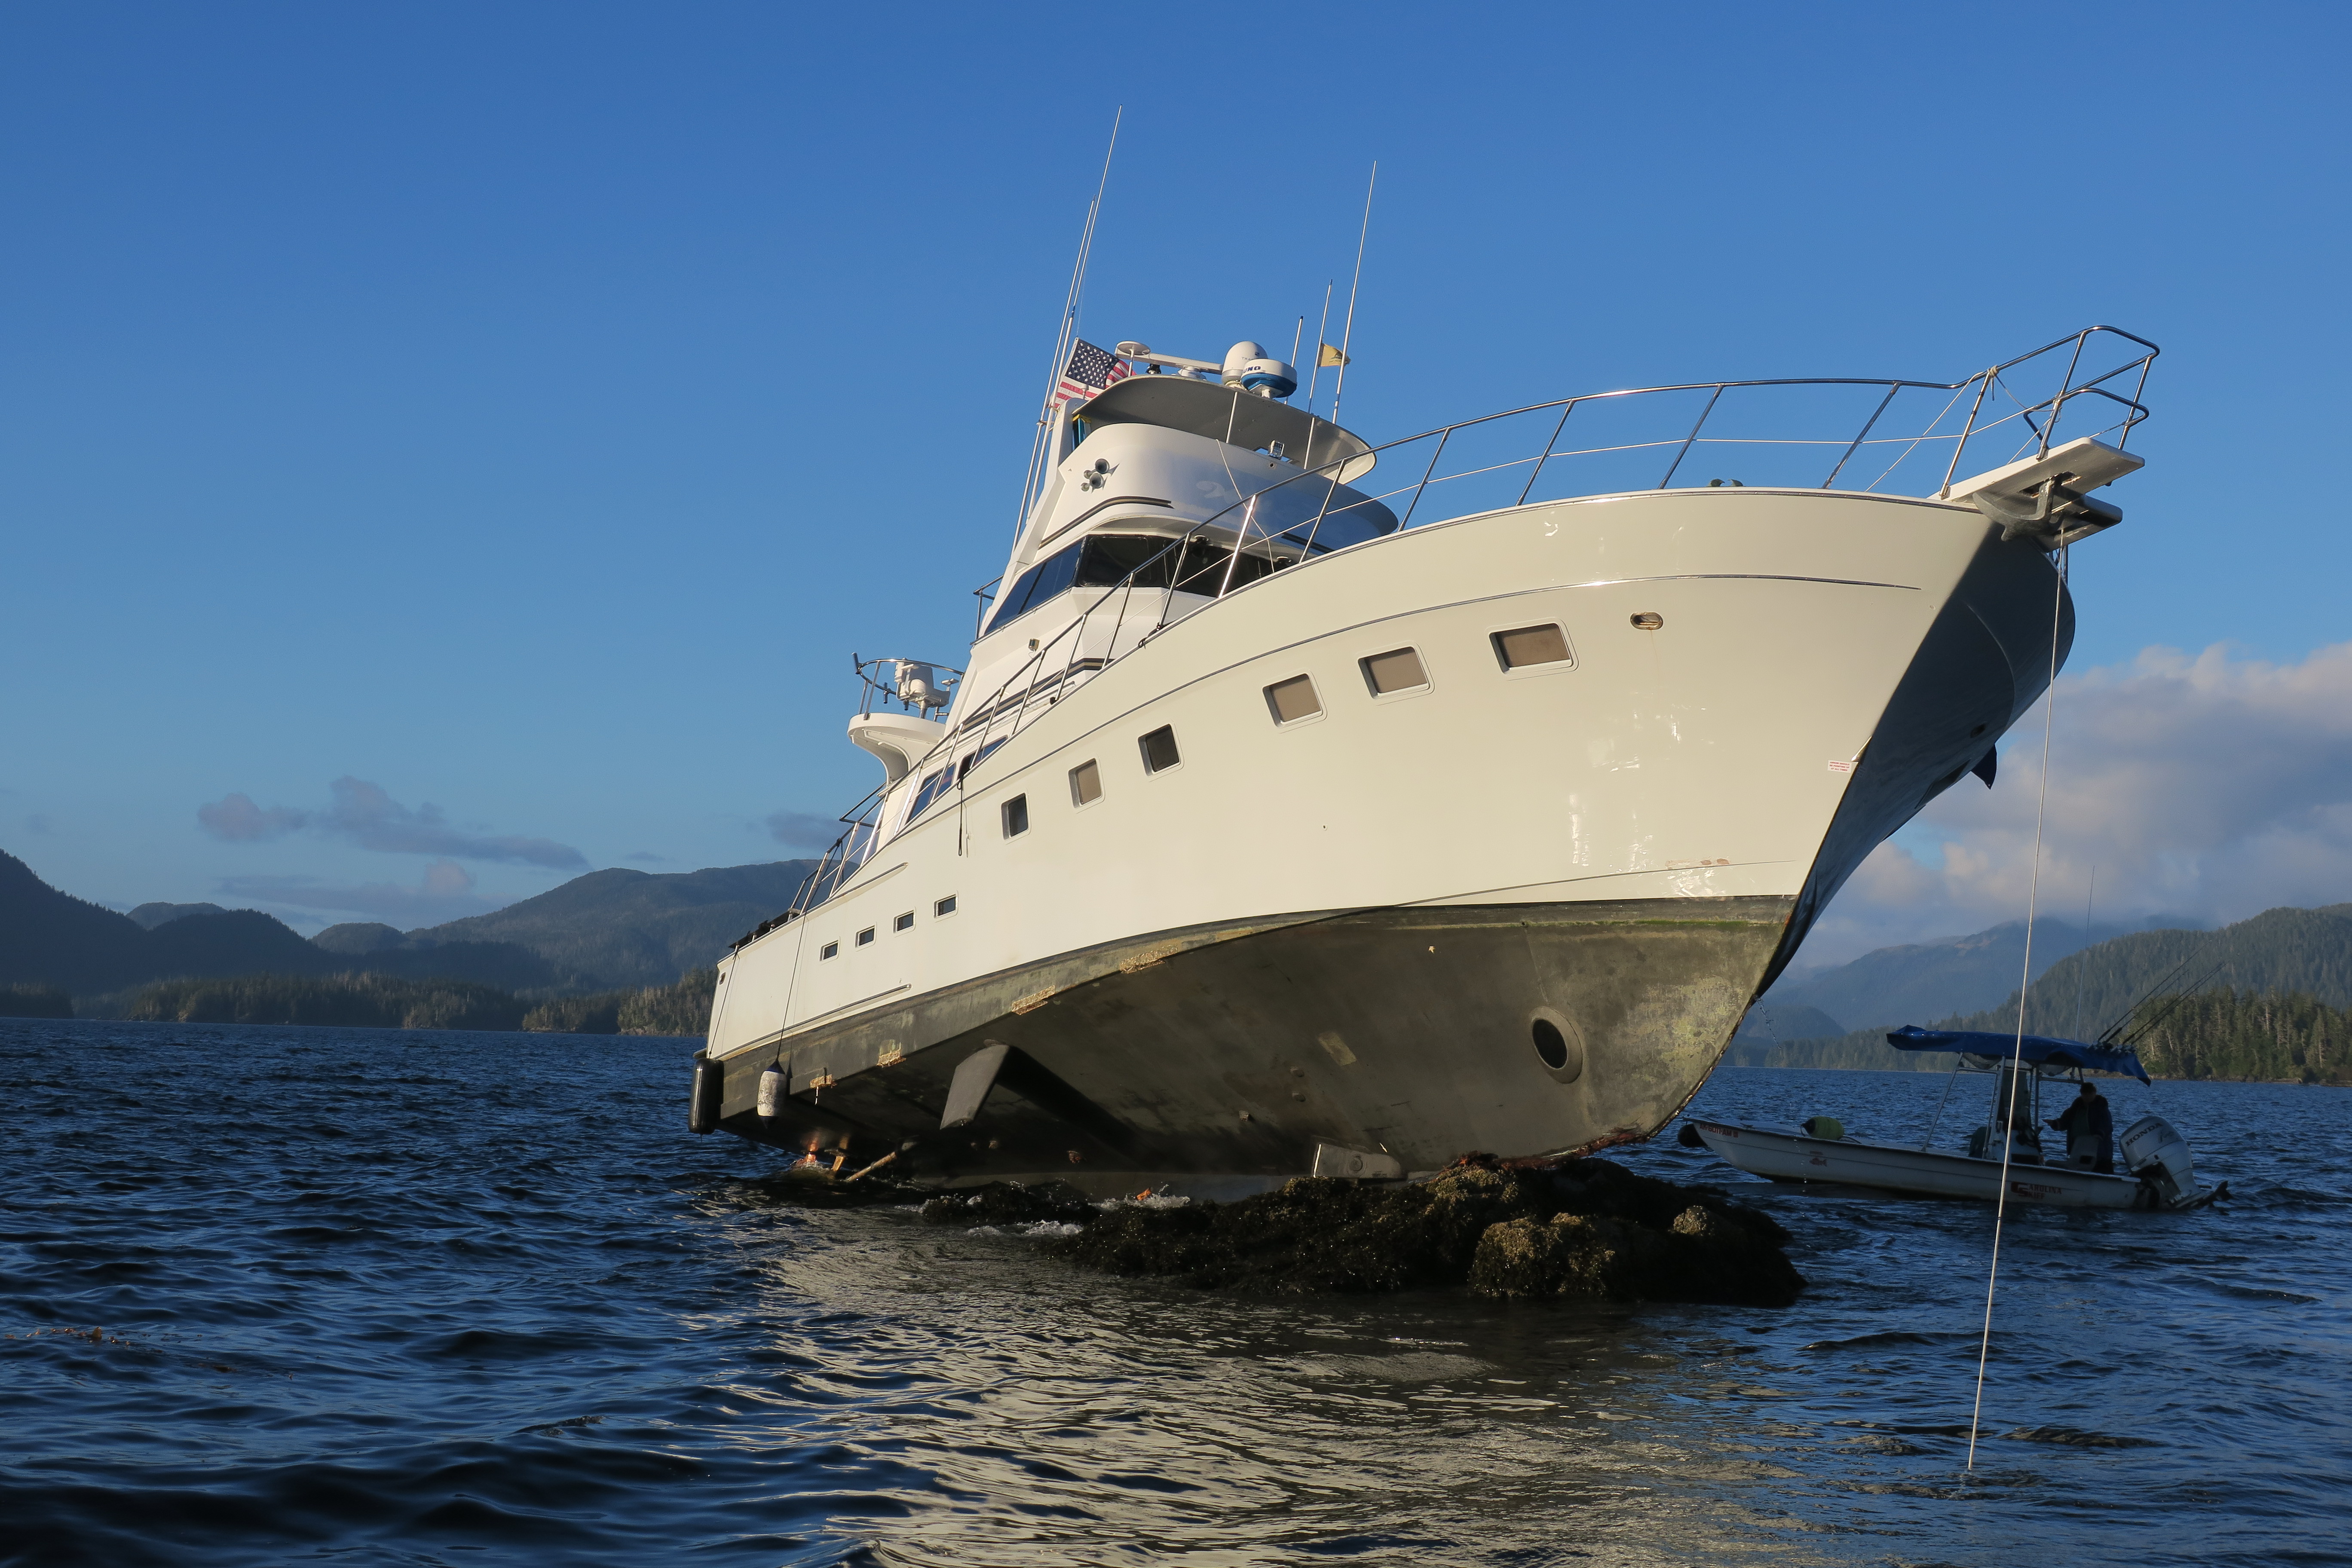 Yacht runs aground during weekend high tide - KCAW